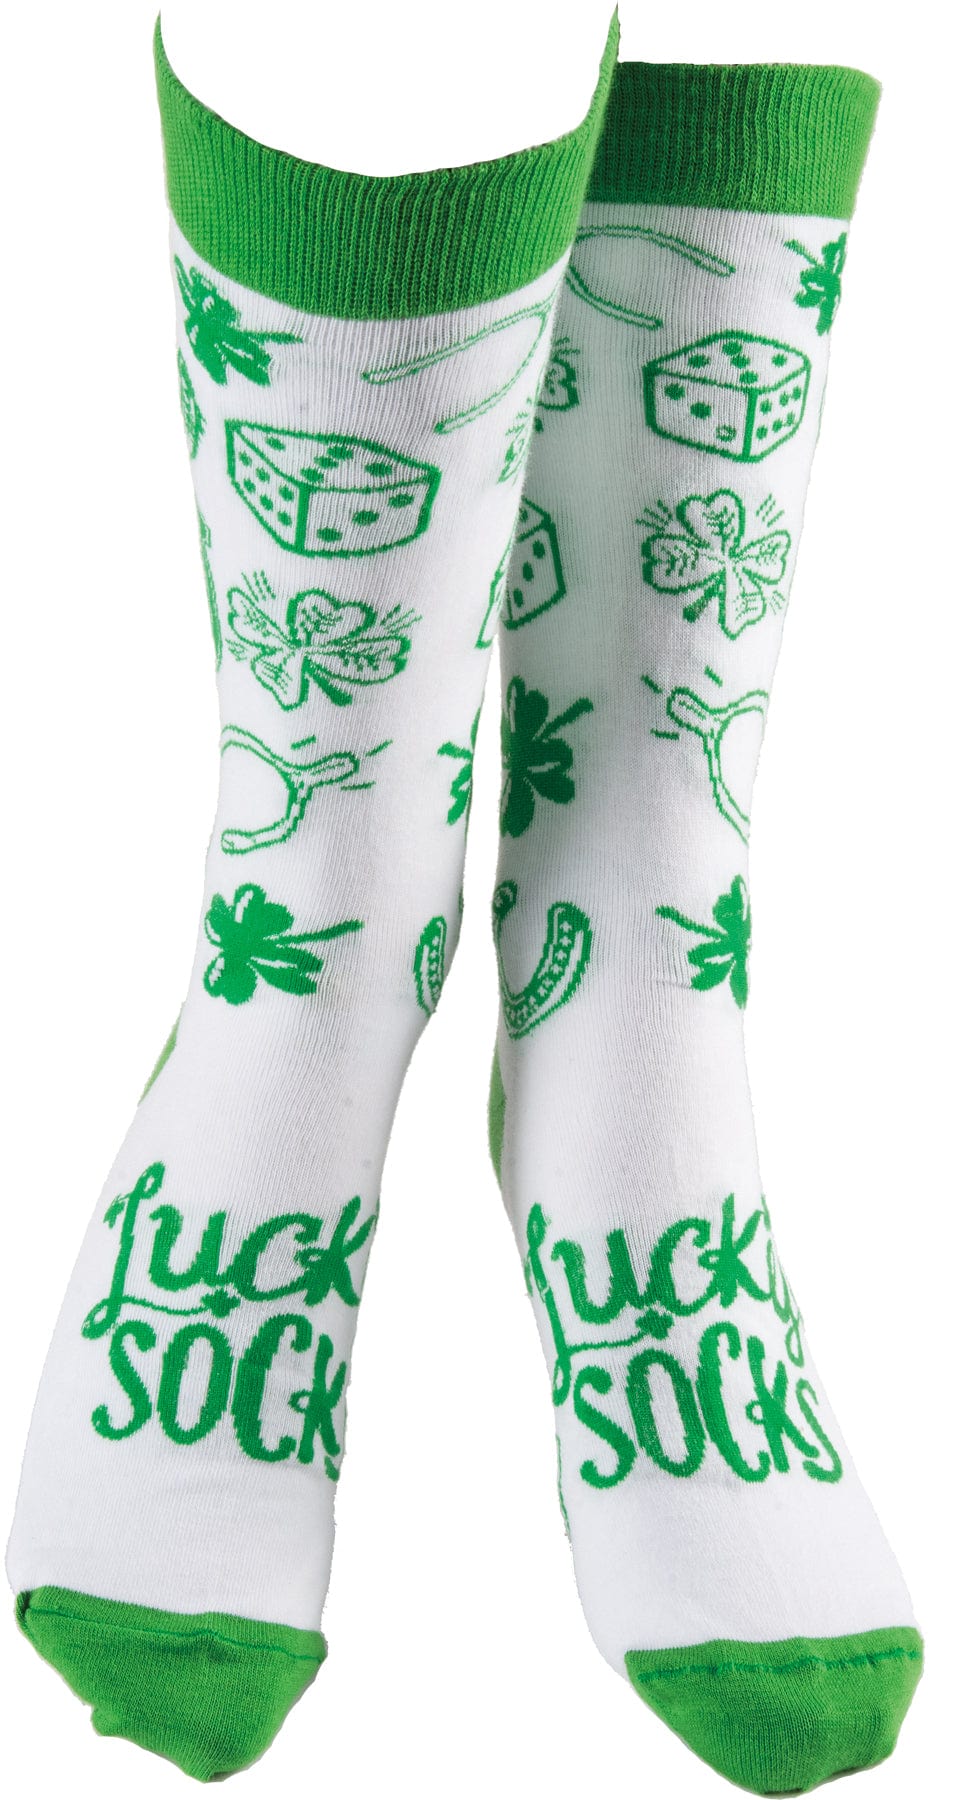 Socks One Size Fits Most Socks - Your Lucky Socks PBK- 34067